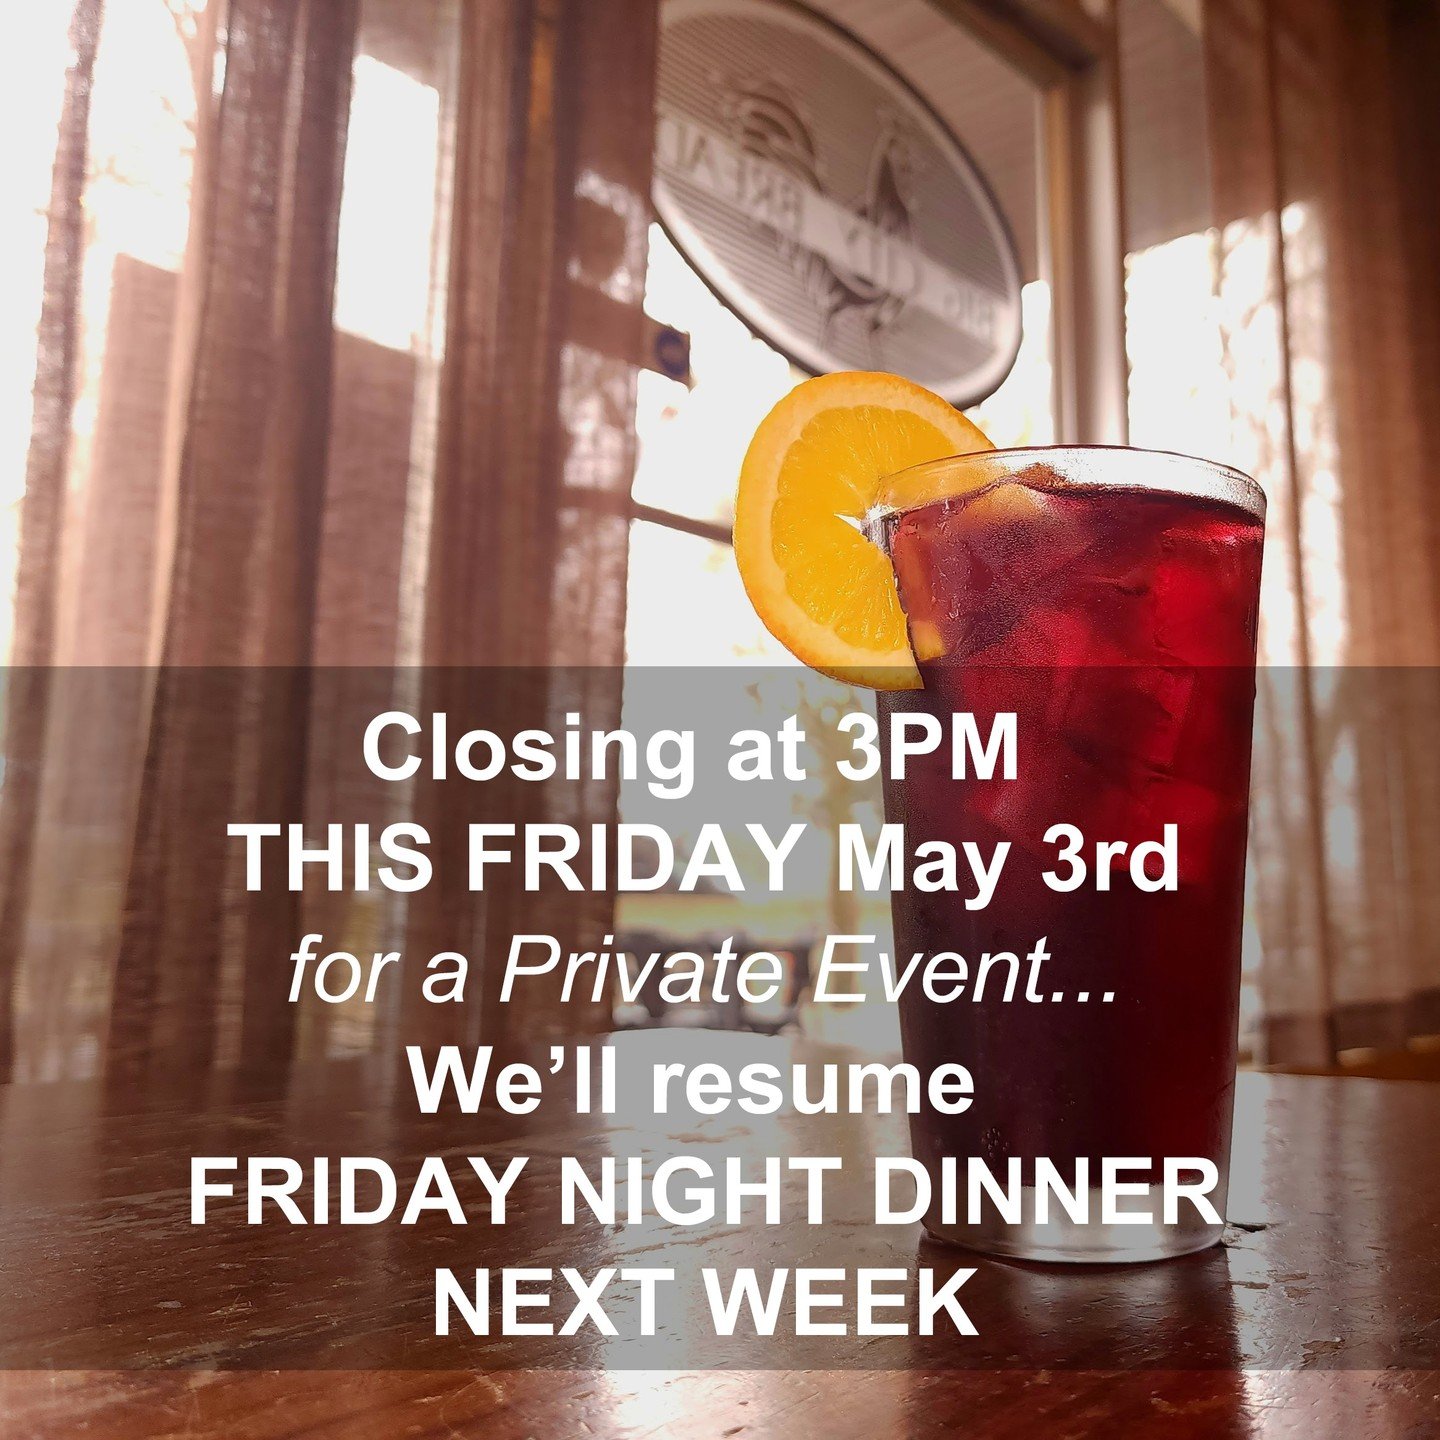 No Friday Night Dinner this week May 3rd at @bigcitybreadcafe as we are closing at 3PM for a private event...

but we'll see you Next Friday 3PM-9PM on May 10th! Can't wait!